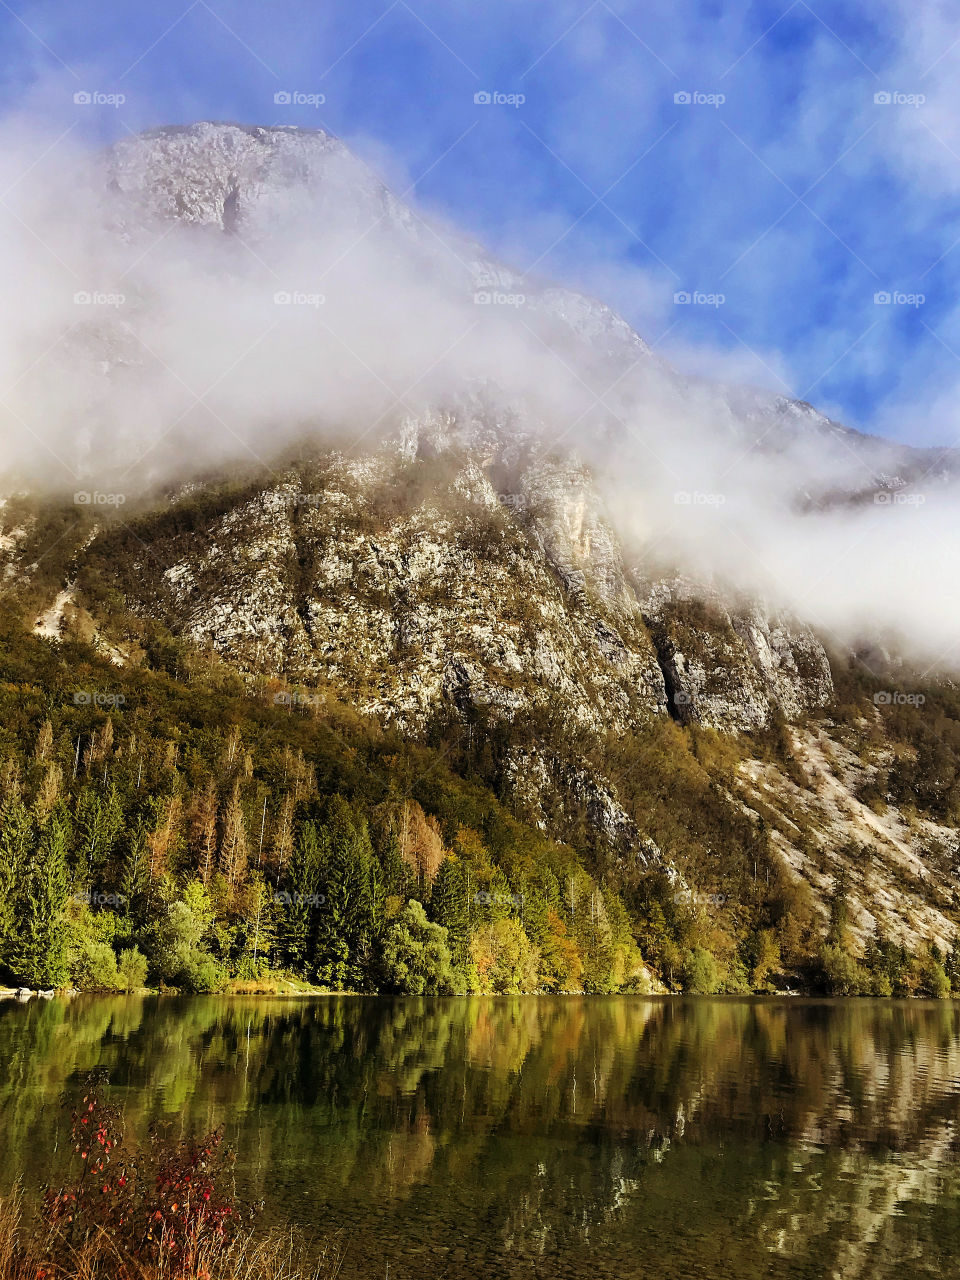 Scenic view of autumn Alps landscape with lake Bohinj in Slovenia and foggy mountains in early morning in fall season. Slovenia travel.